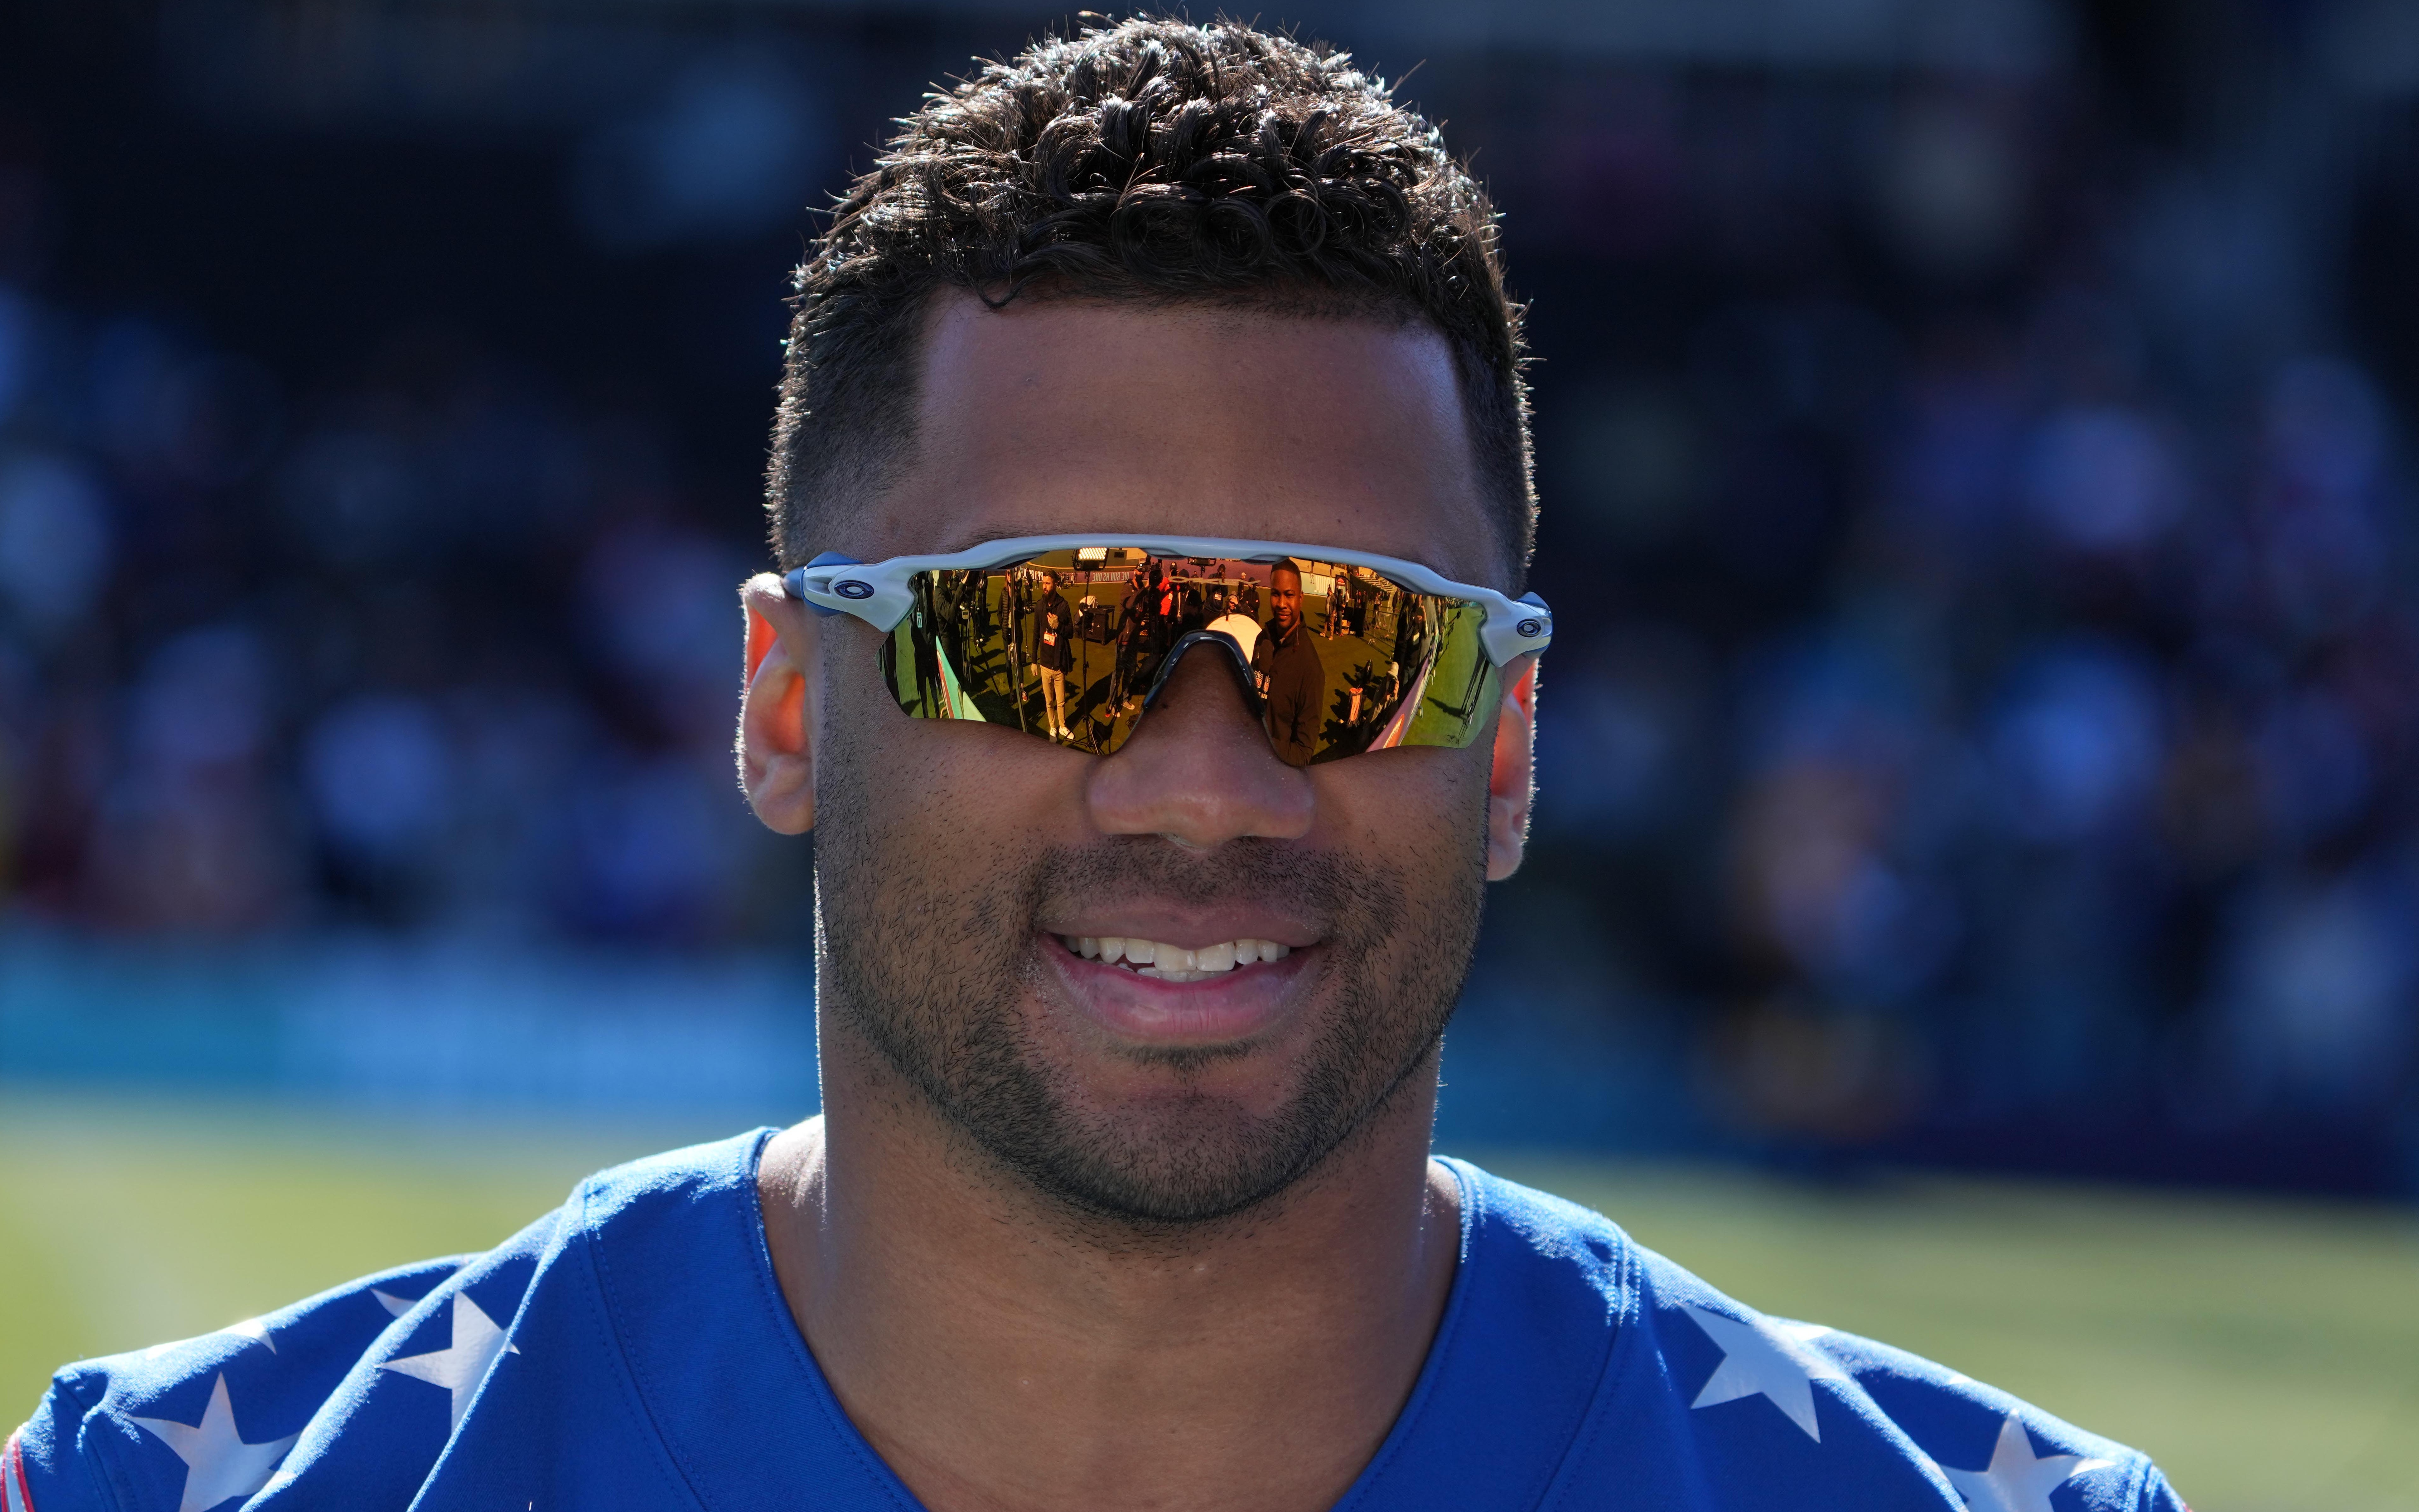 Russell Wilson at the Pro Bowl. Credit: Kirby Lee, USA TODAY Sports.